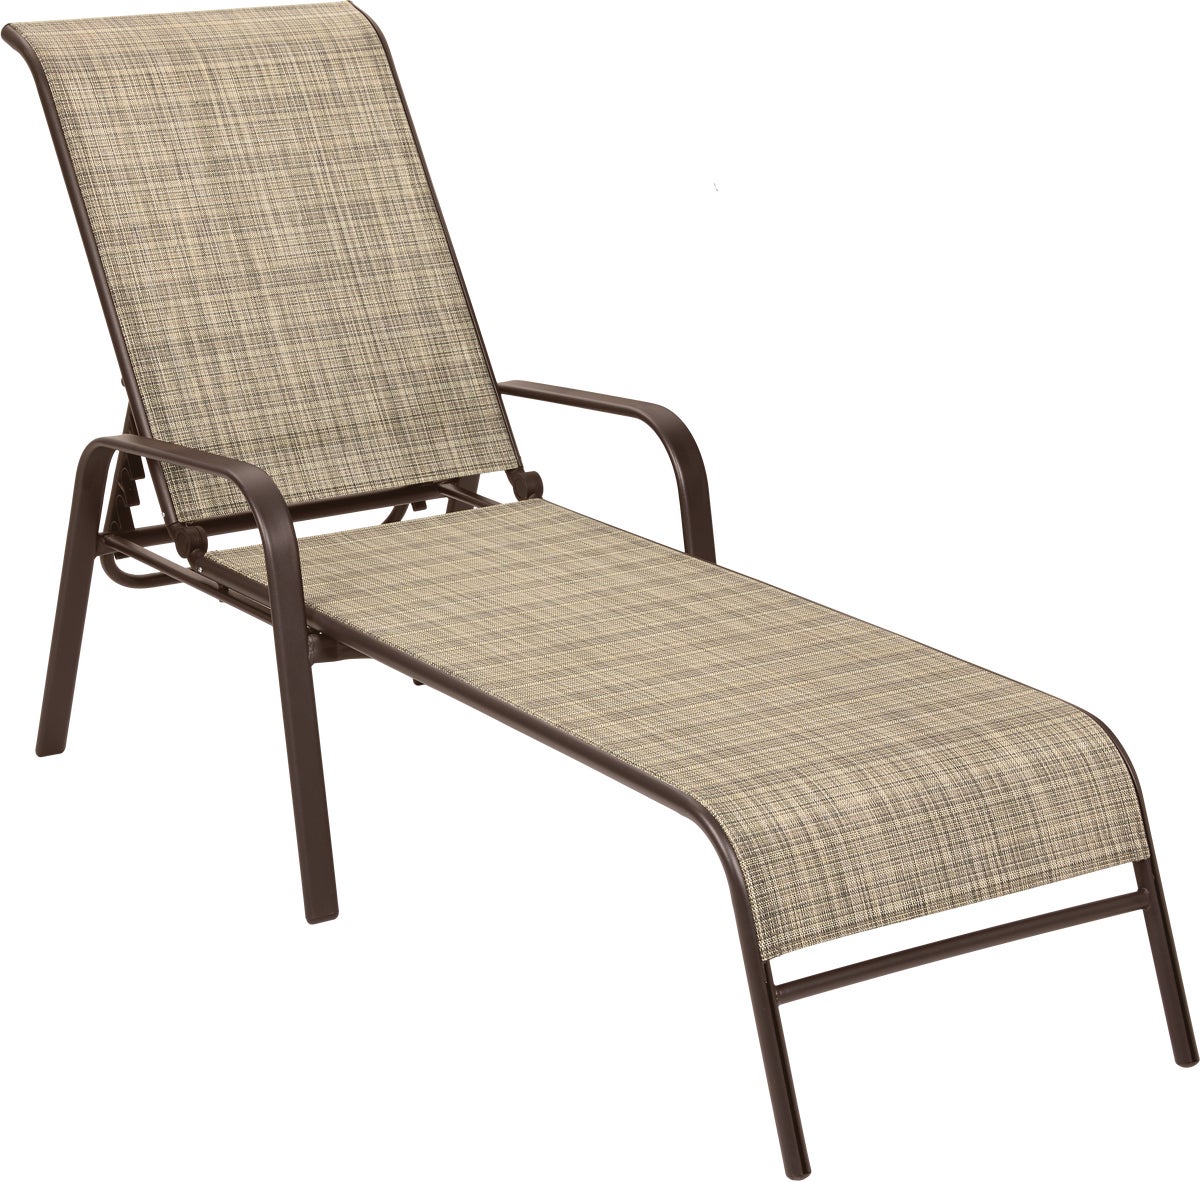 Buy Outdoor Expressions Windsor Collection Chaise Lounge